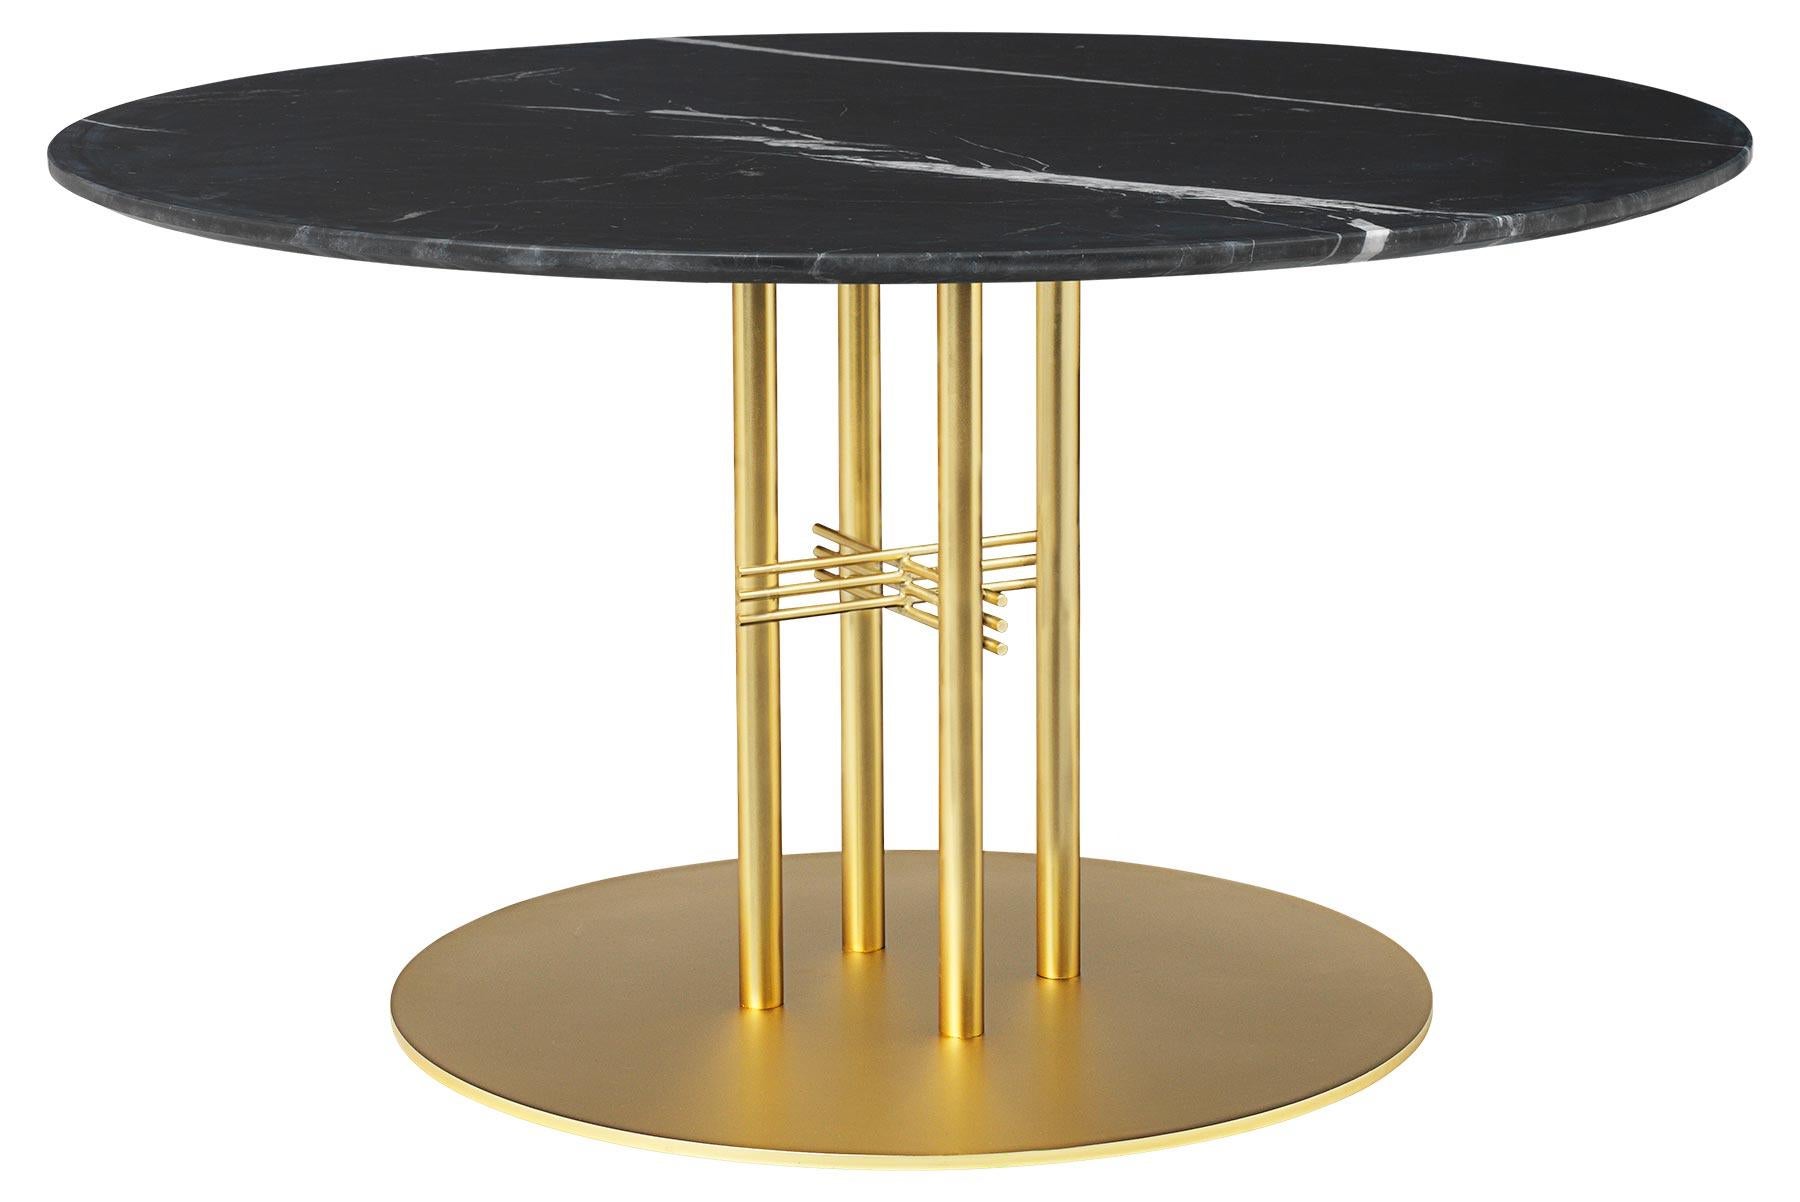 With TS collection, the design duo GamFratesi has proven that a strong design idea can hold a wealth of development possibilities. Gubi is proud to present its latest additions, the TS column bar table, dining table and lounge table.

The TS